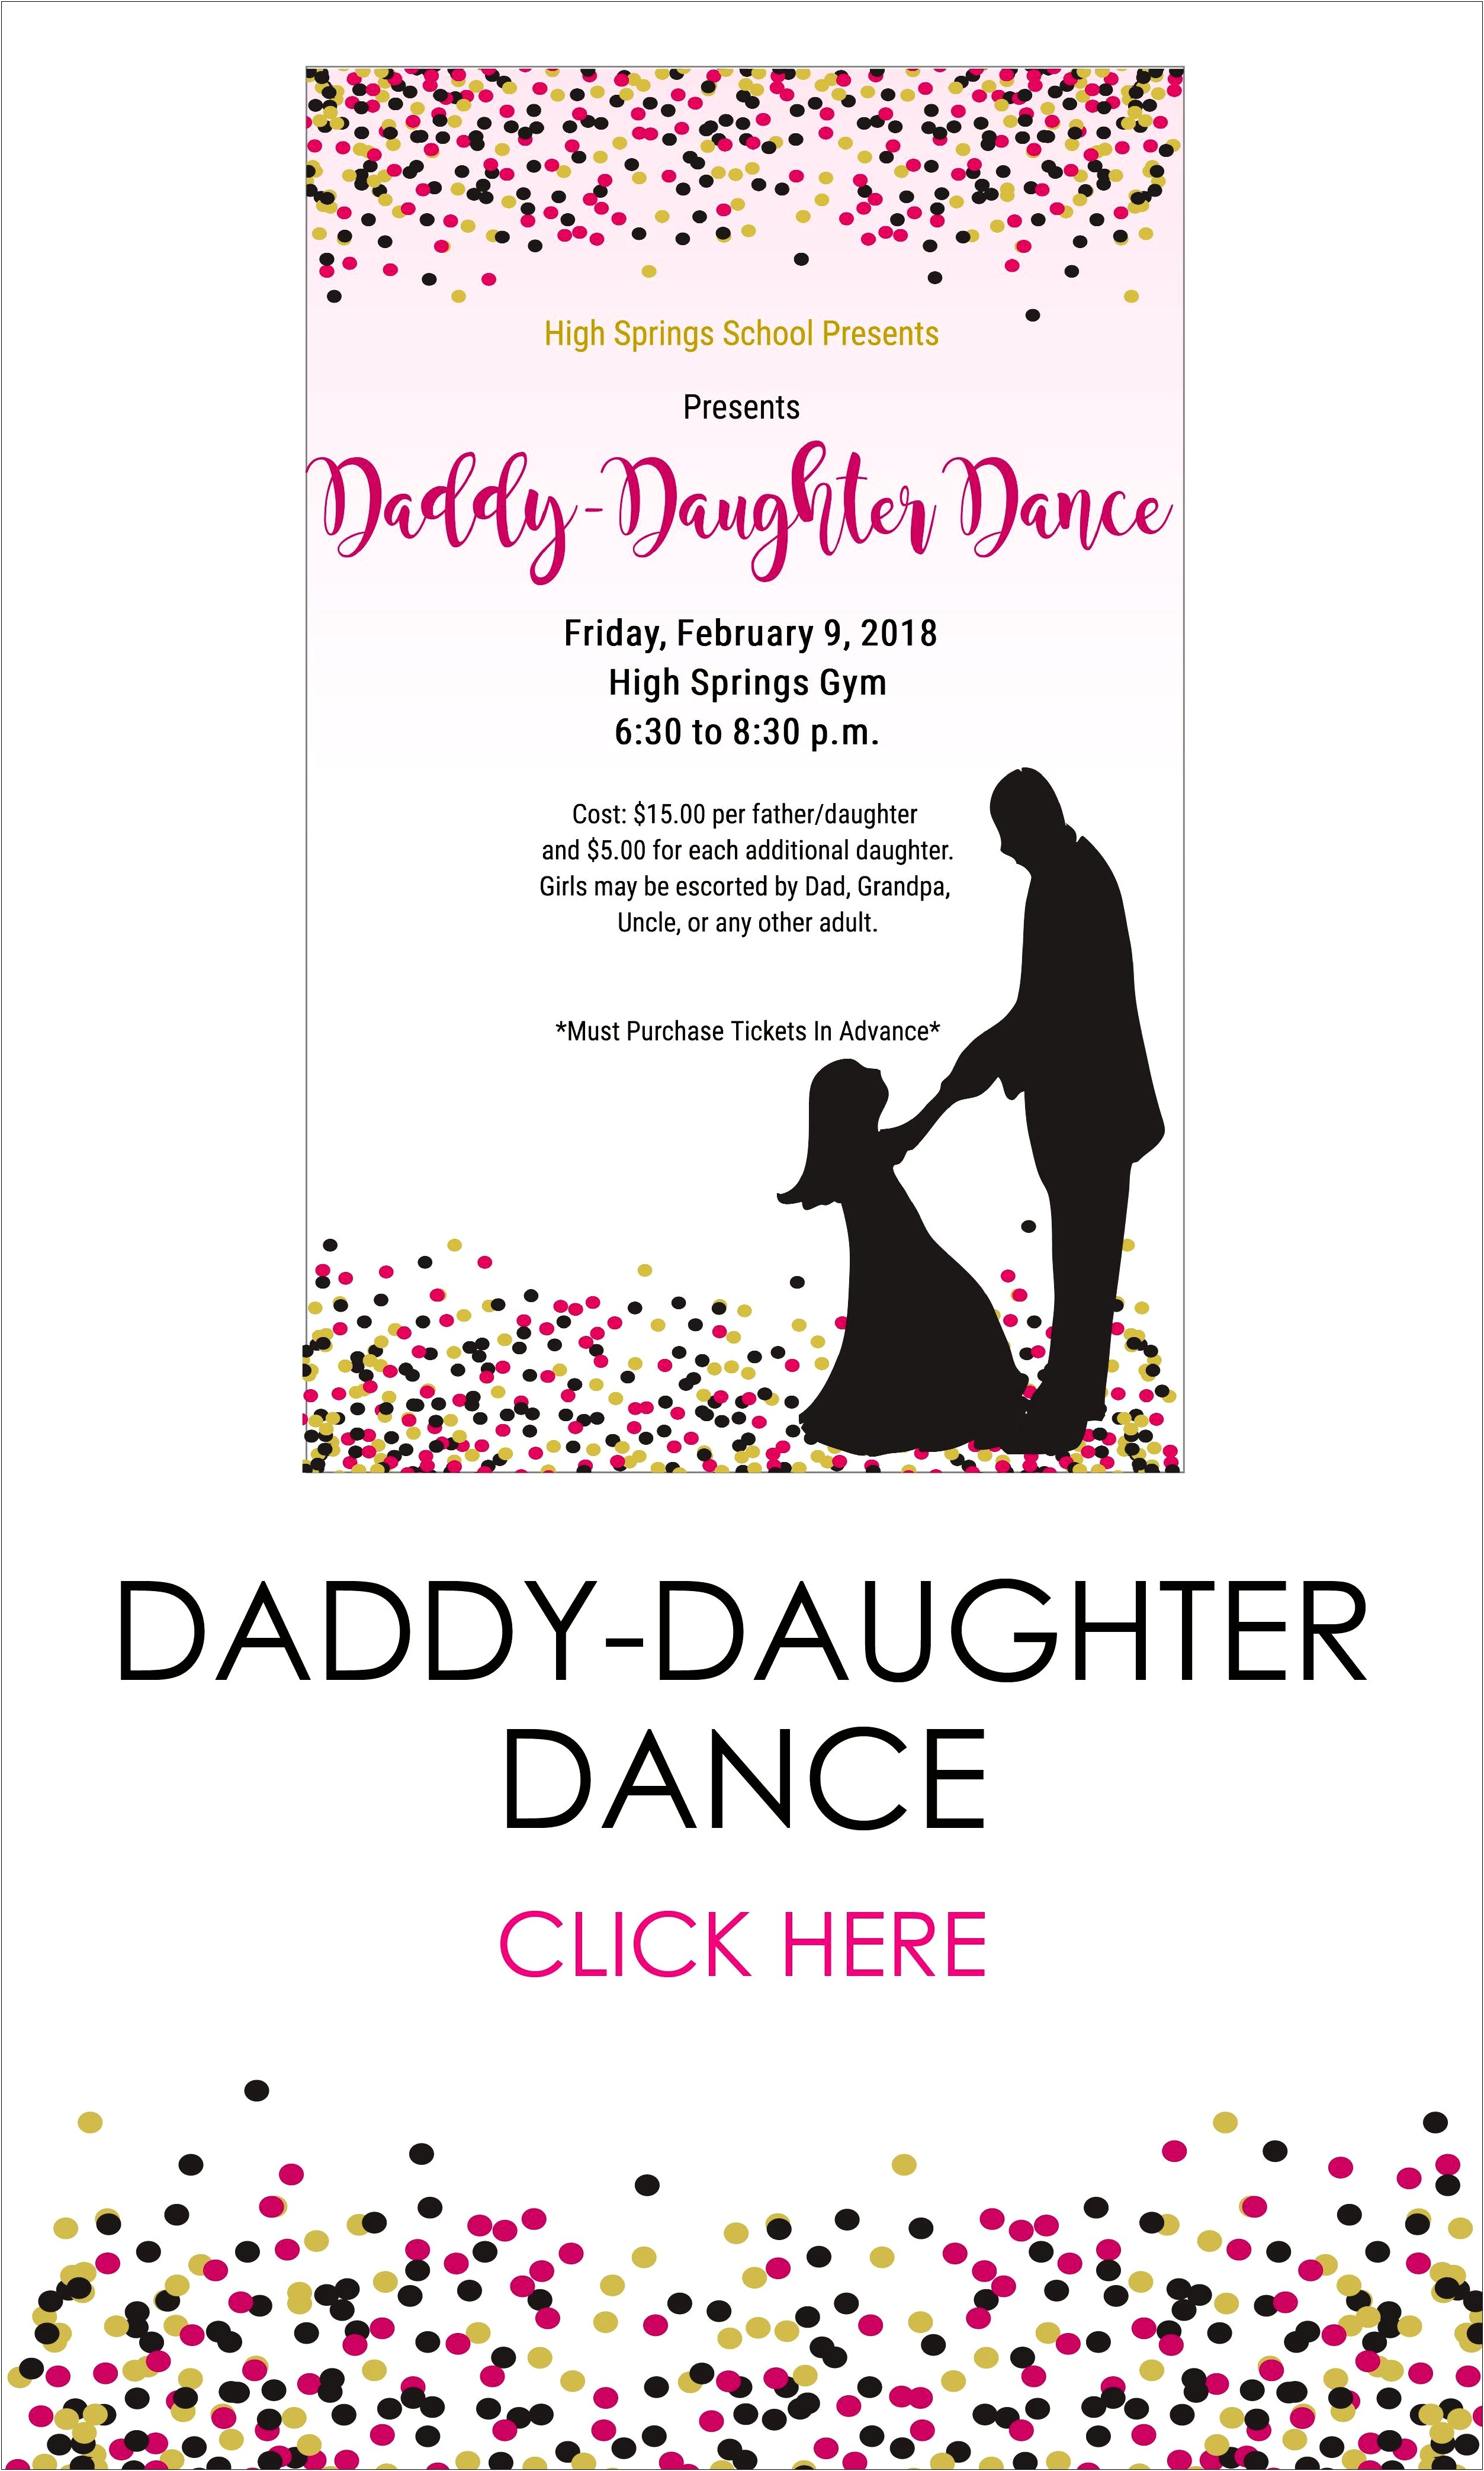 free-father-daughter-dance-flyer-templates-templates-resume-designs-qv1xjpjg4a